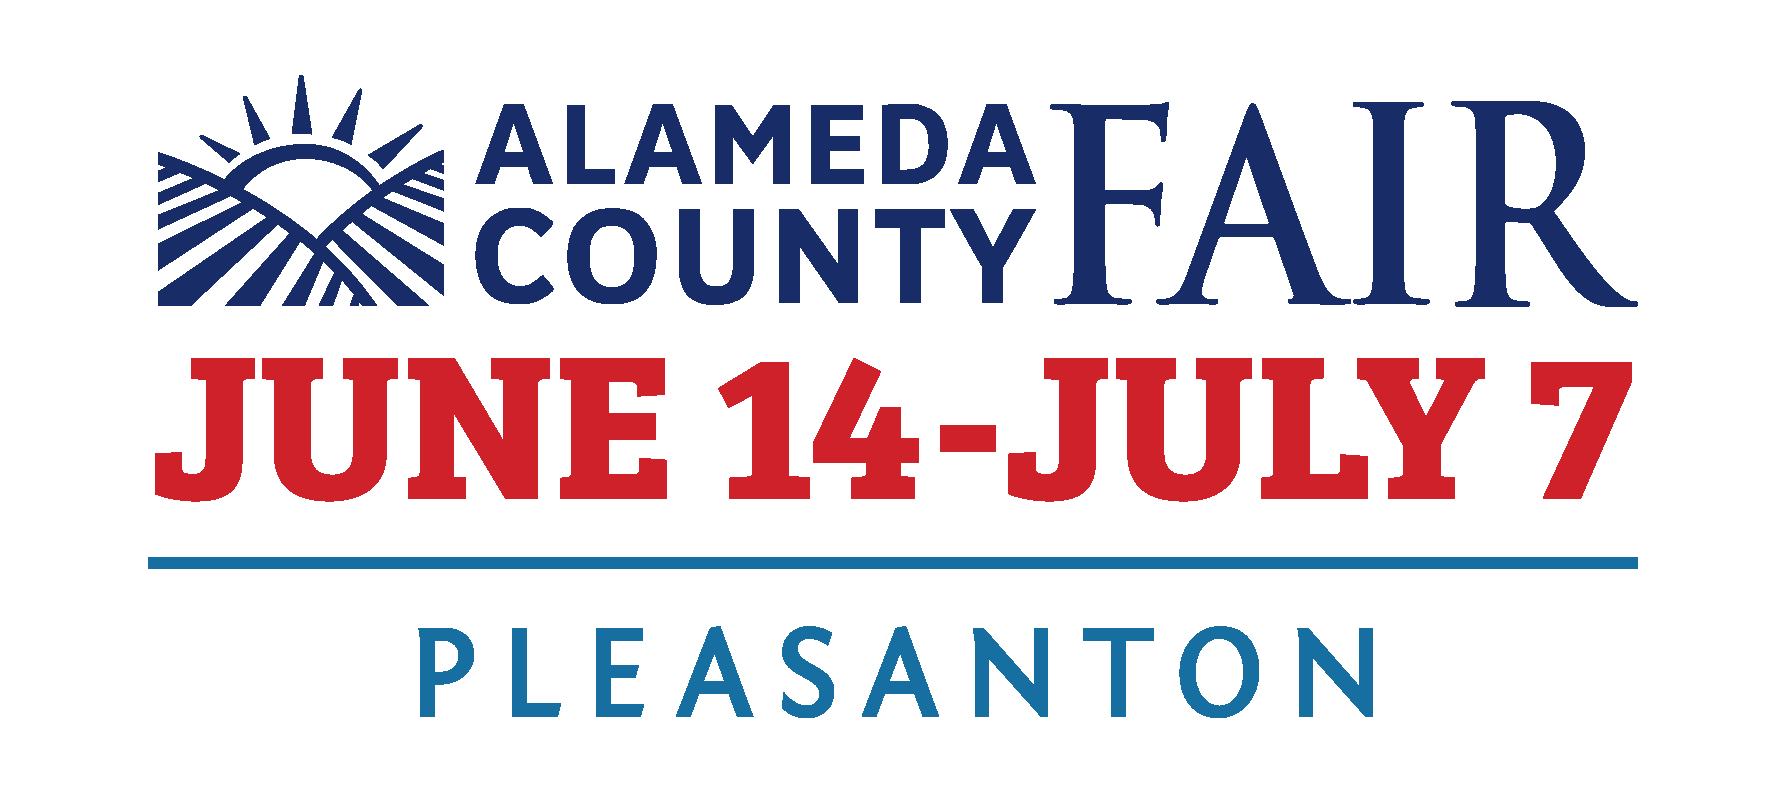 WINNER! Alameda County Fair Returns with New Ride & Delicious Food